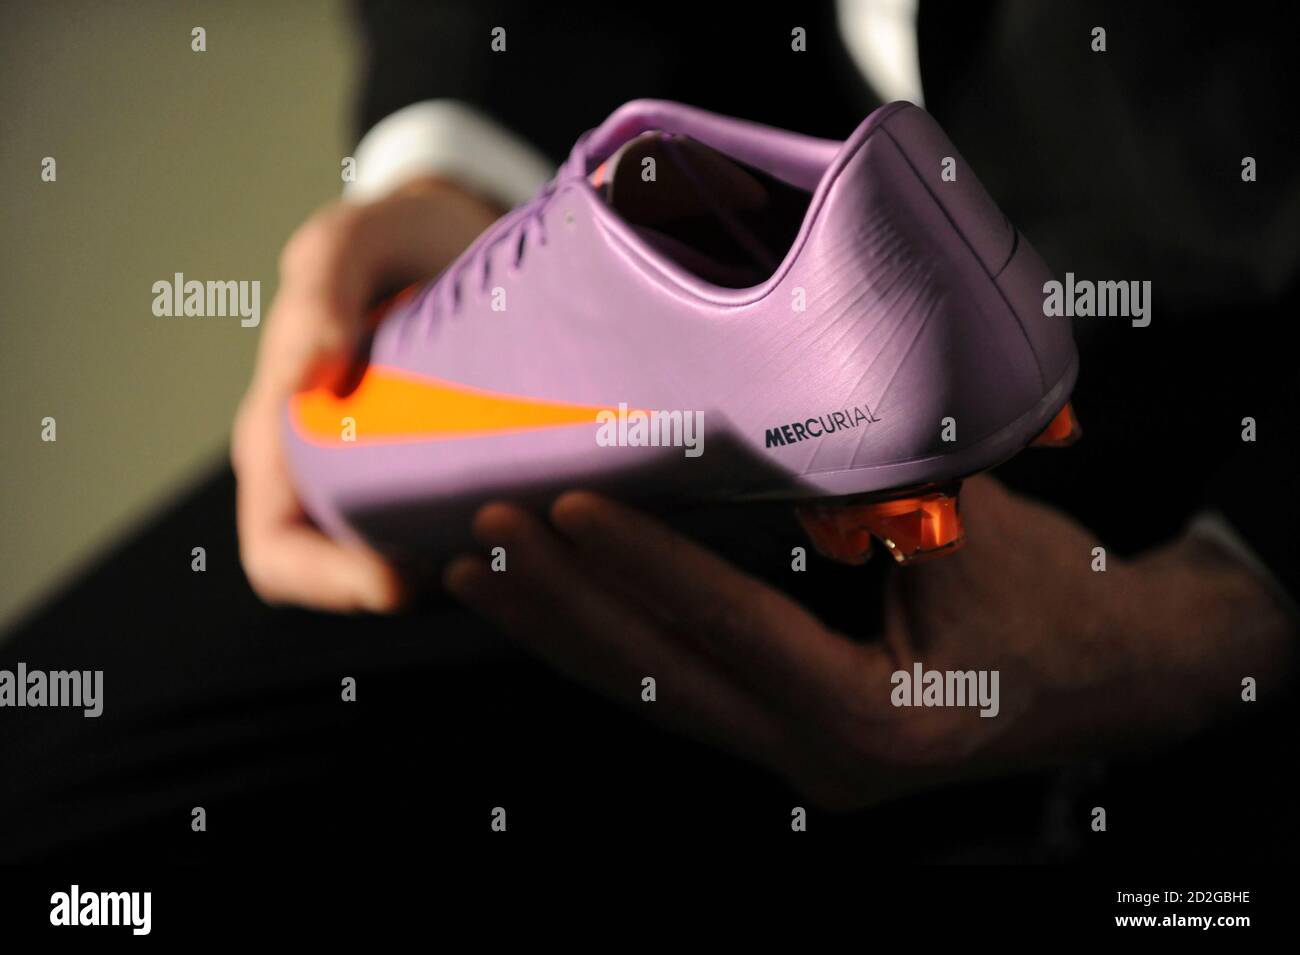 Nike CEO Mark Parker holds the new Mercurial Vapor SuperFly II soccer boot  during its launch at an event in London February 24, 2010. REUTERS/Jas  Lehal (BRITAIN - Tags: SPORT SOCCER BUSINESS